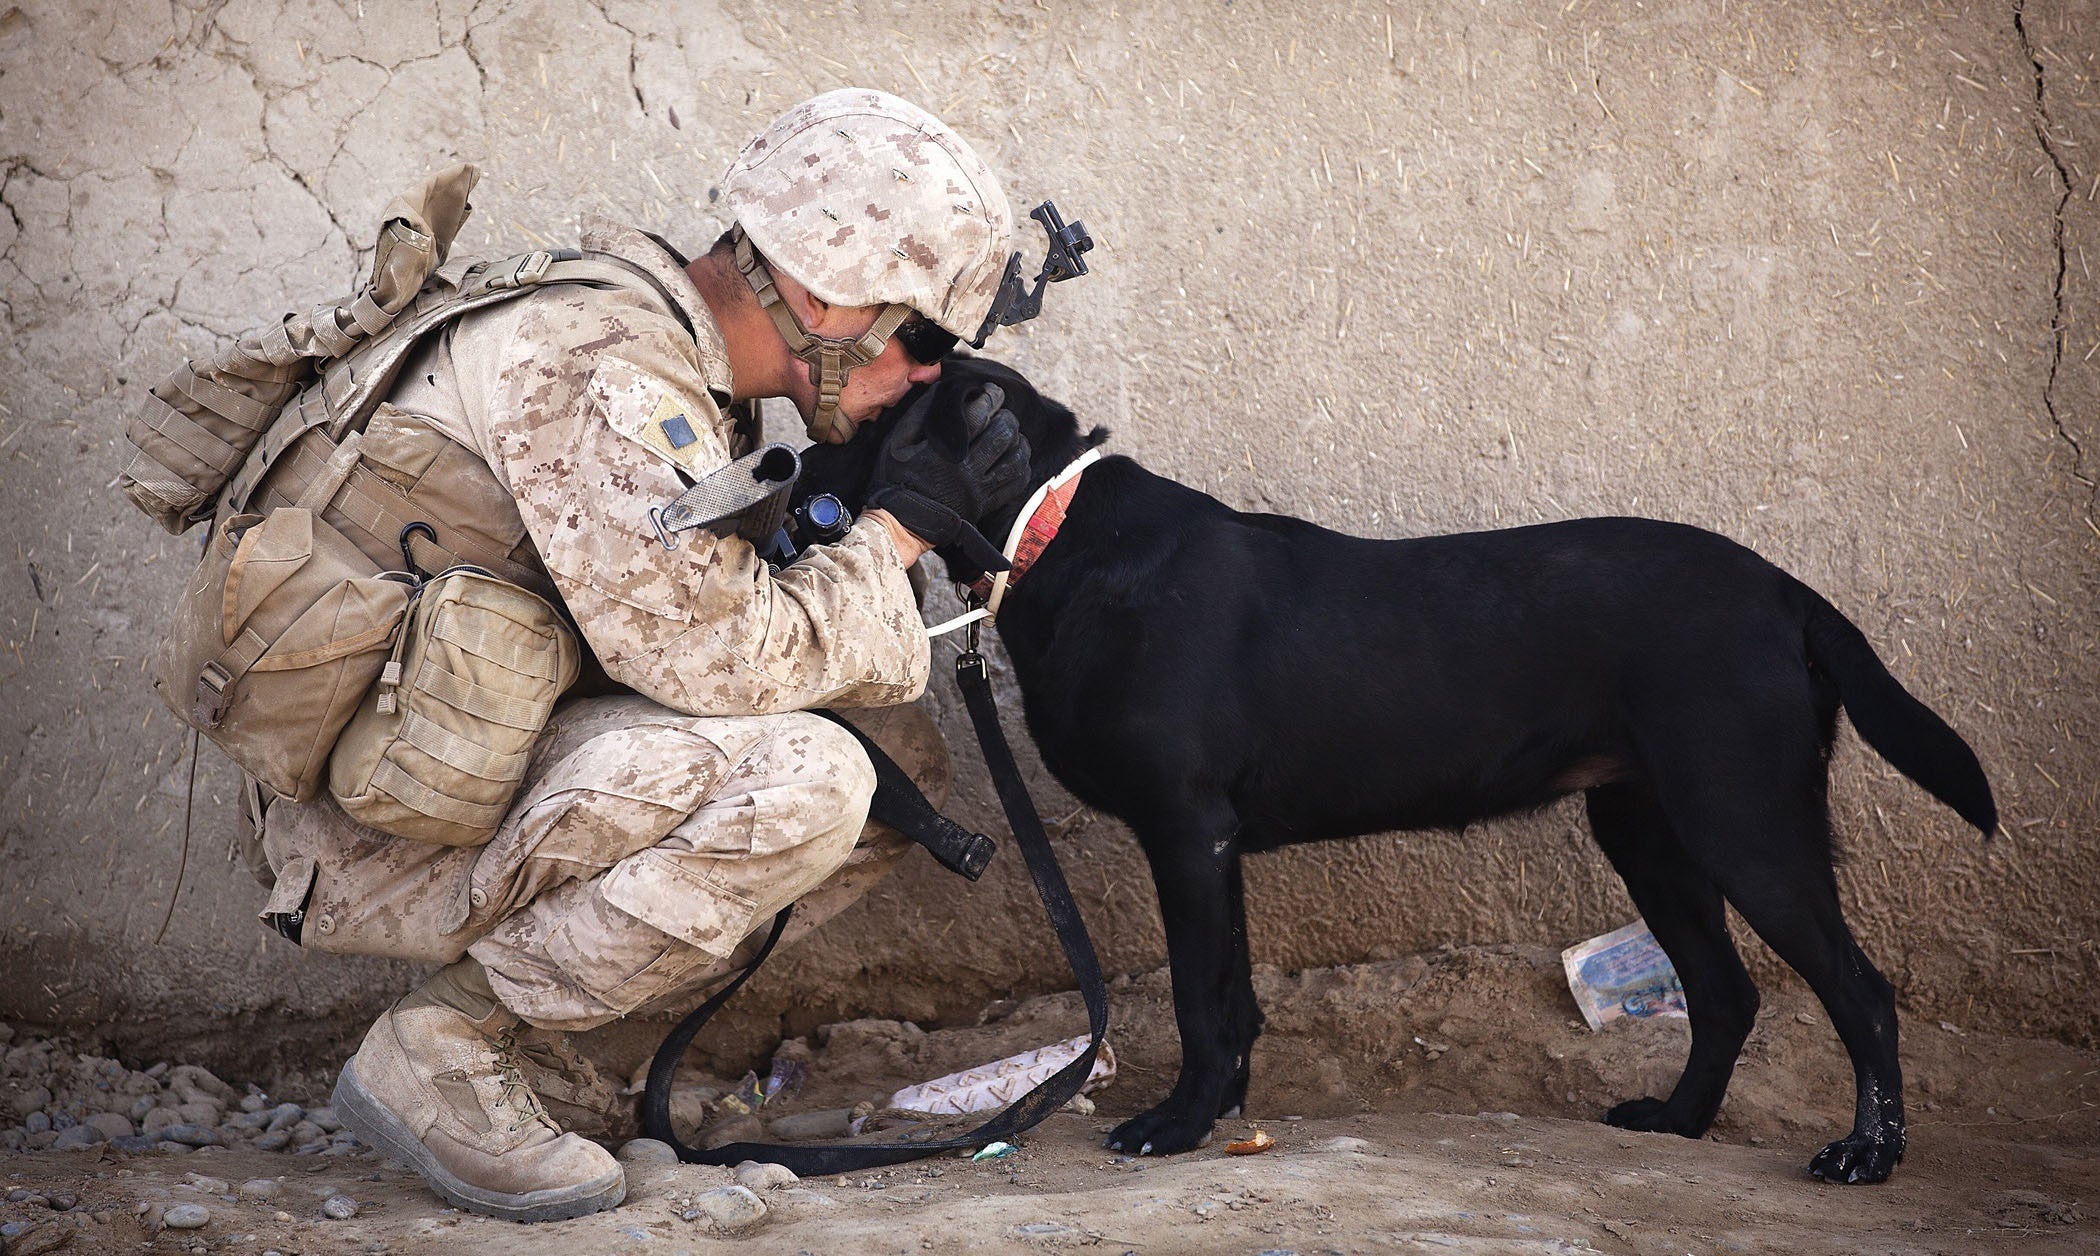 Soldier with dog